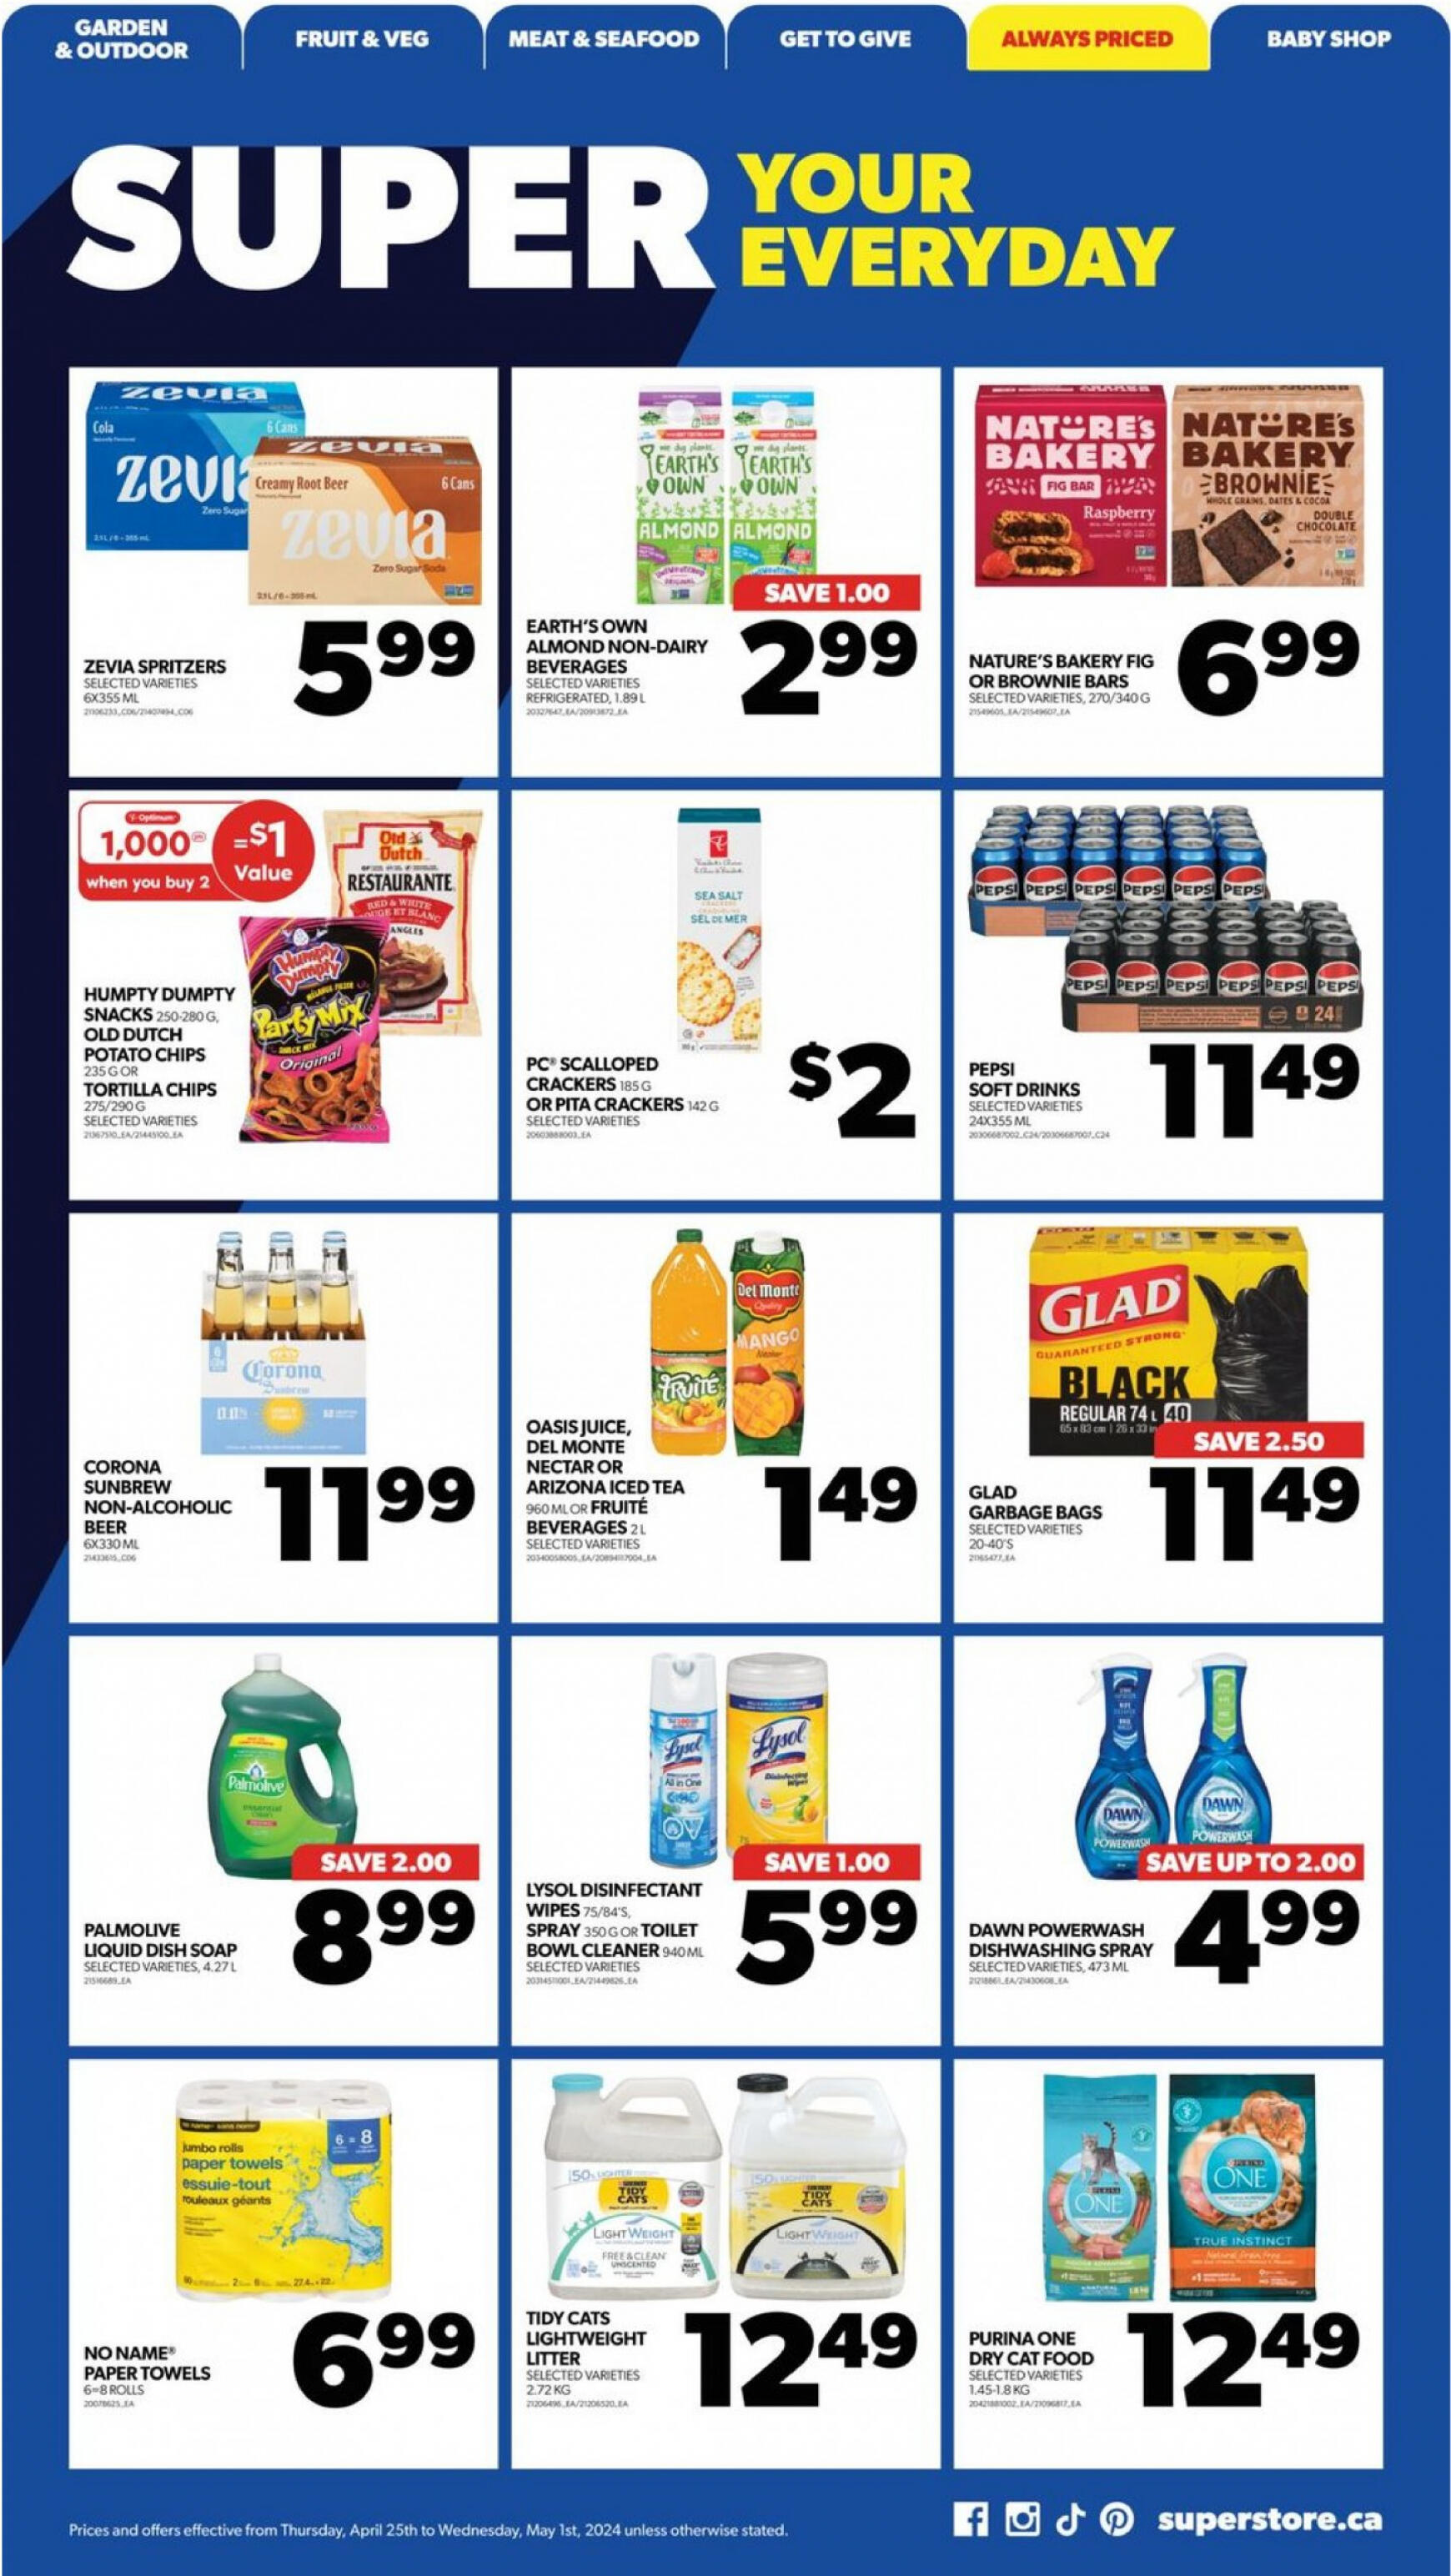 real-canadian-superstore - Real Canadian Superstore flyer current 01.05. - 31.05. - page: 21